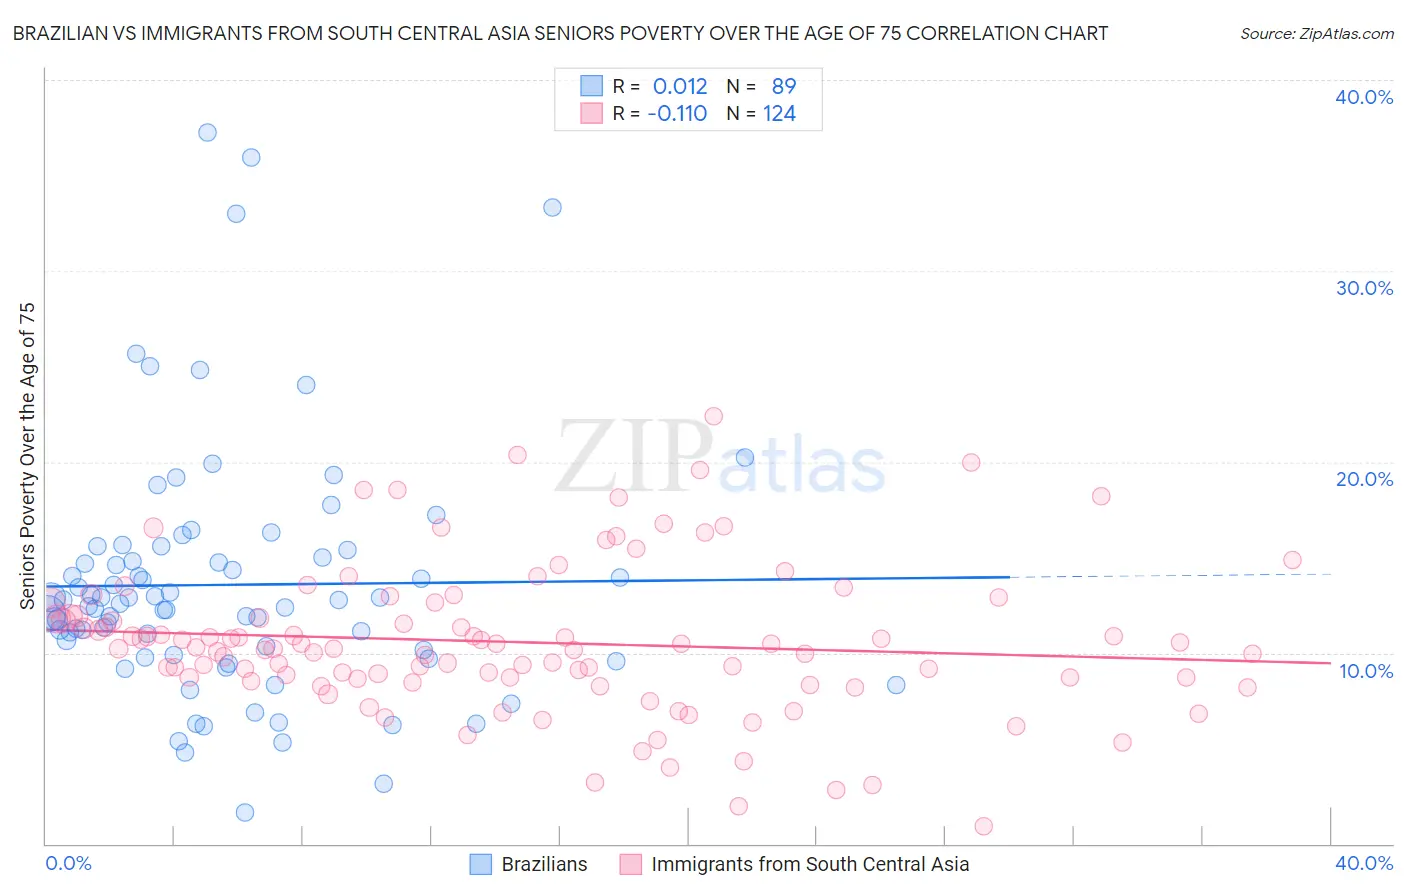 Brazilian vs Immigrants from South Central Asia Seniors Poverty Over the Age of 75